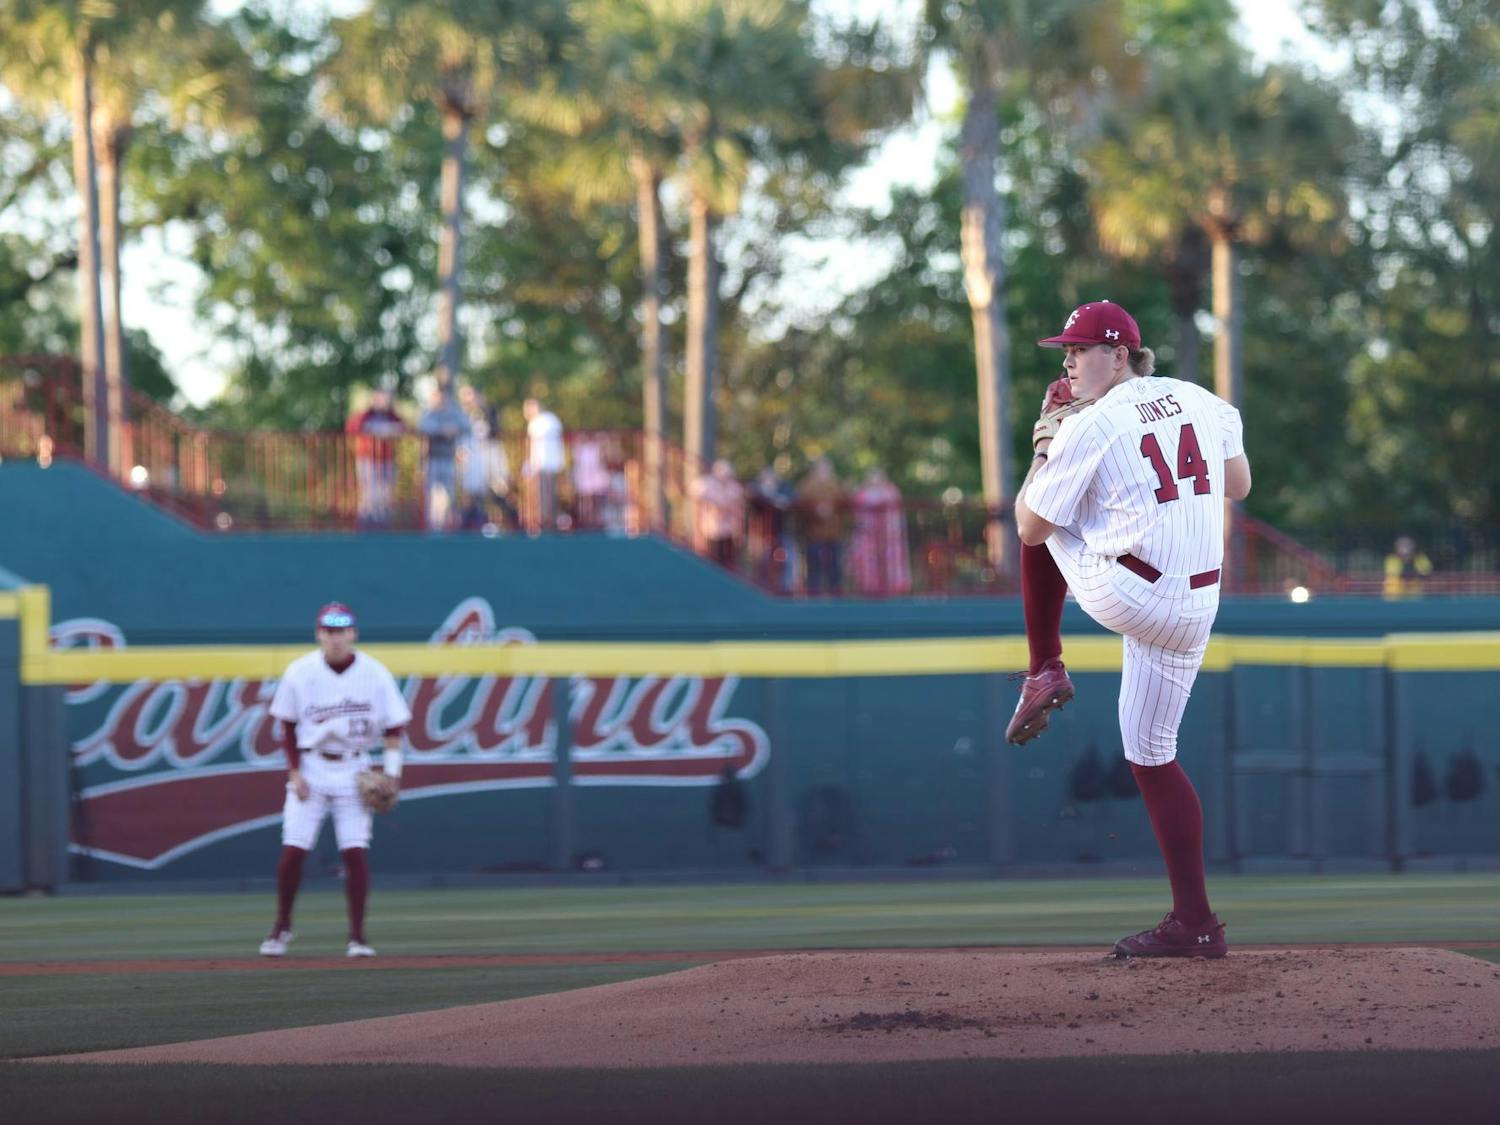 The ɫɫƵ baseball team played a two-game series against the Texas A&amp;M Aggies on Friday, April 5, and Saturday, April 6, 2024. The ɫɫƵs fell in both matchups, losing 2-9 and 3-6, respectively. The Aggies scored 7 runs in the first three innings on Friday, all but securing its win. On Saturday, senior infielder Gavin Casas hit South Carolina's first pinch-hit home run since the its game against Florida on May 19, 2022, but it wasn't enough to push the ɫɫƵs ahead of the Aggies. Next up, South Carolina will face UNC on April 9, 2024, at 7 p.m. on the road at Truist Field in Charlotte, North Carolina.